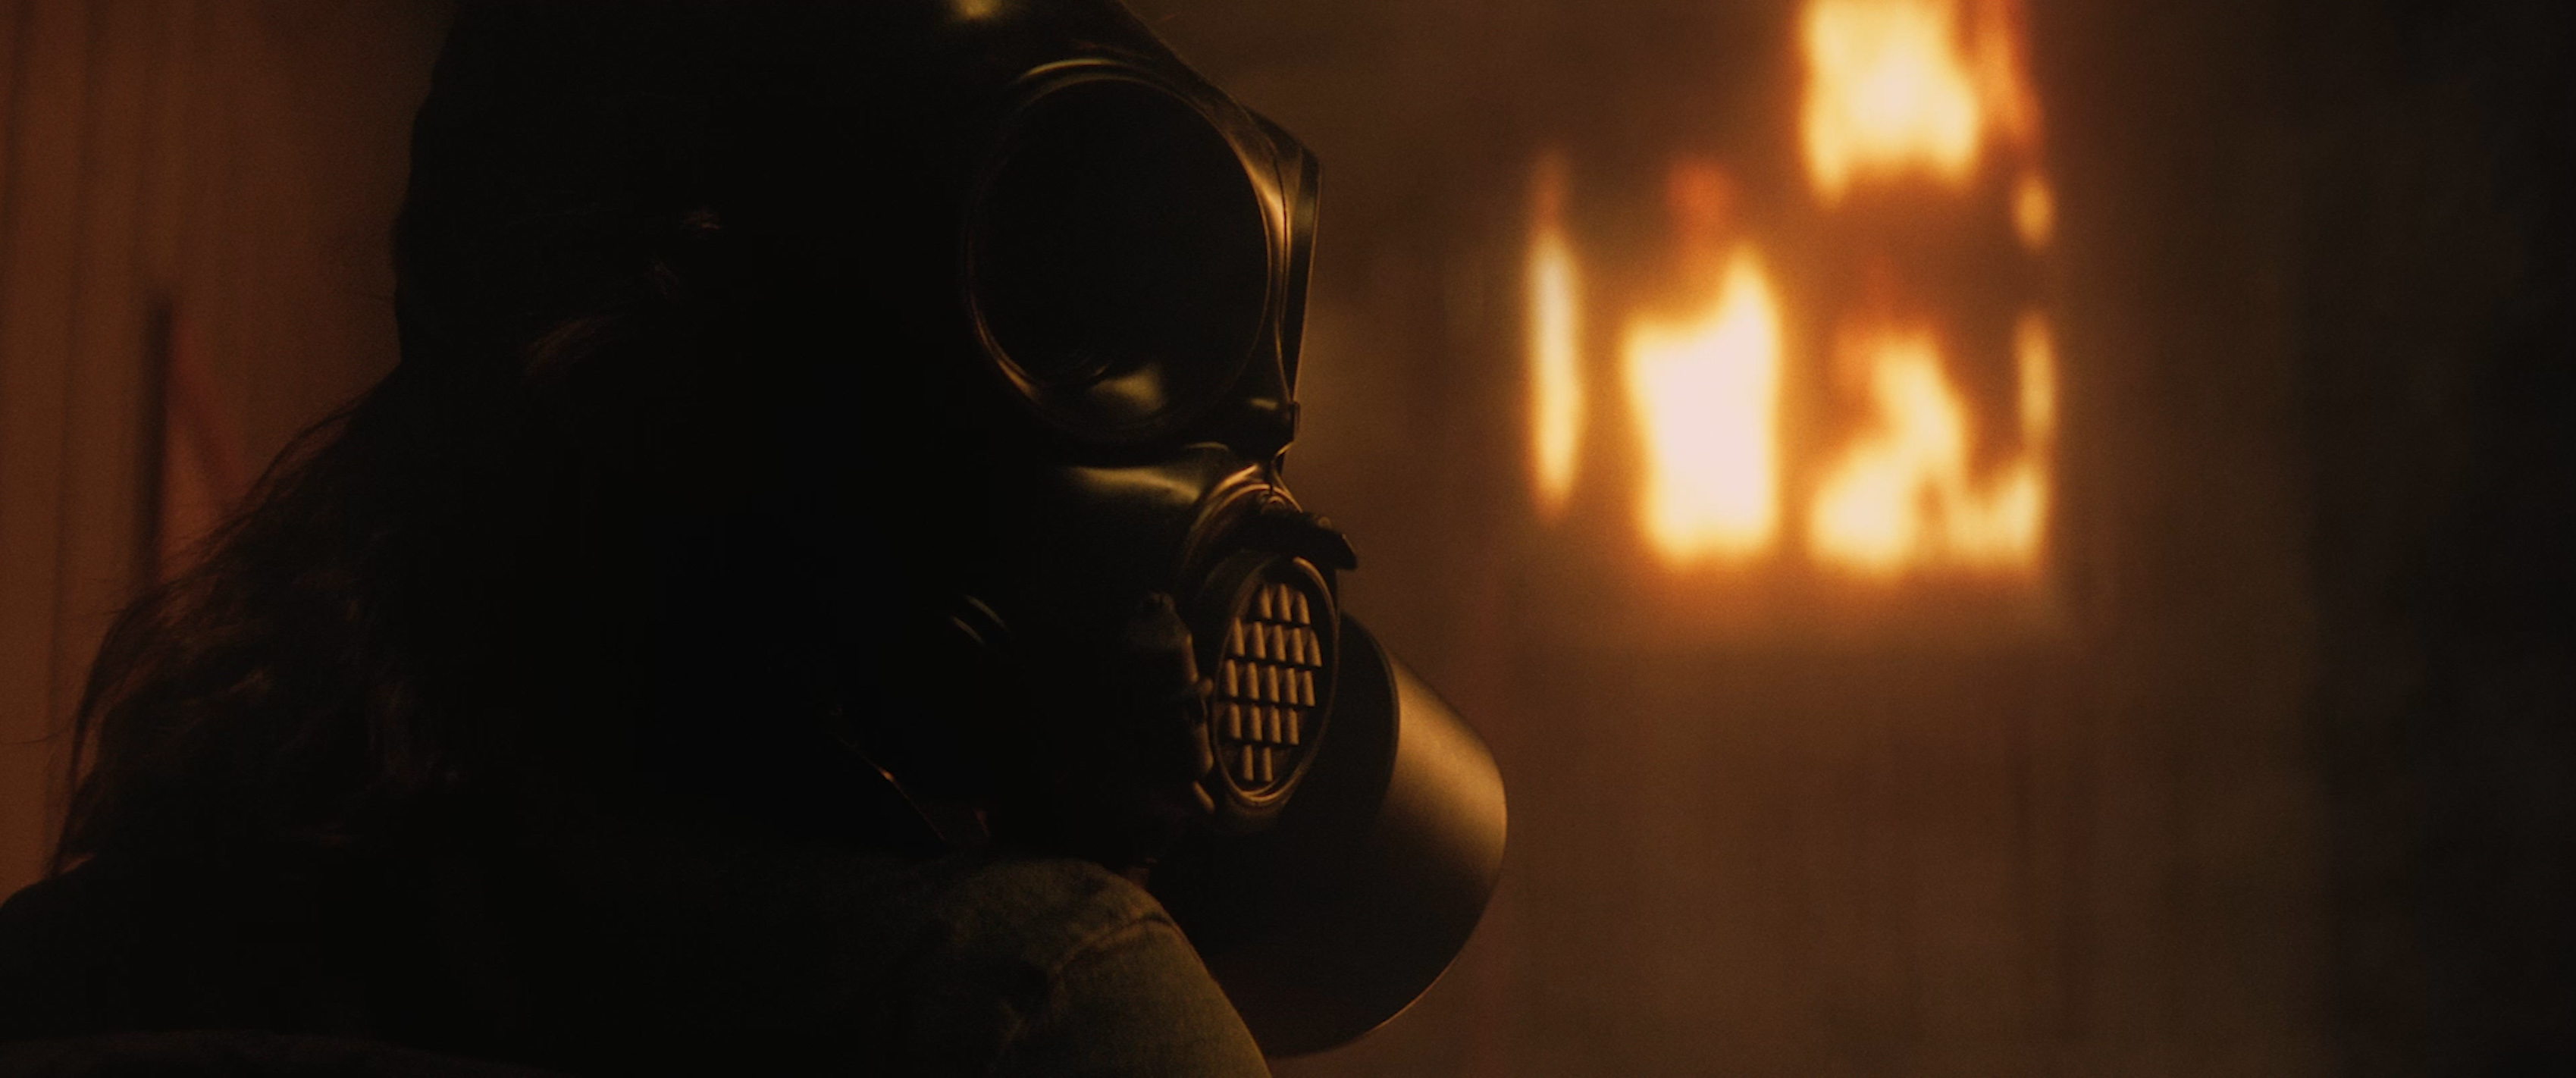 Still from the film, featuring a gas mask in the foreground and some sort of fire in the background.